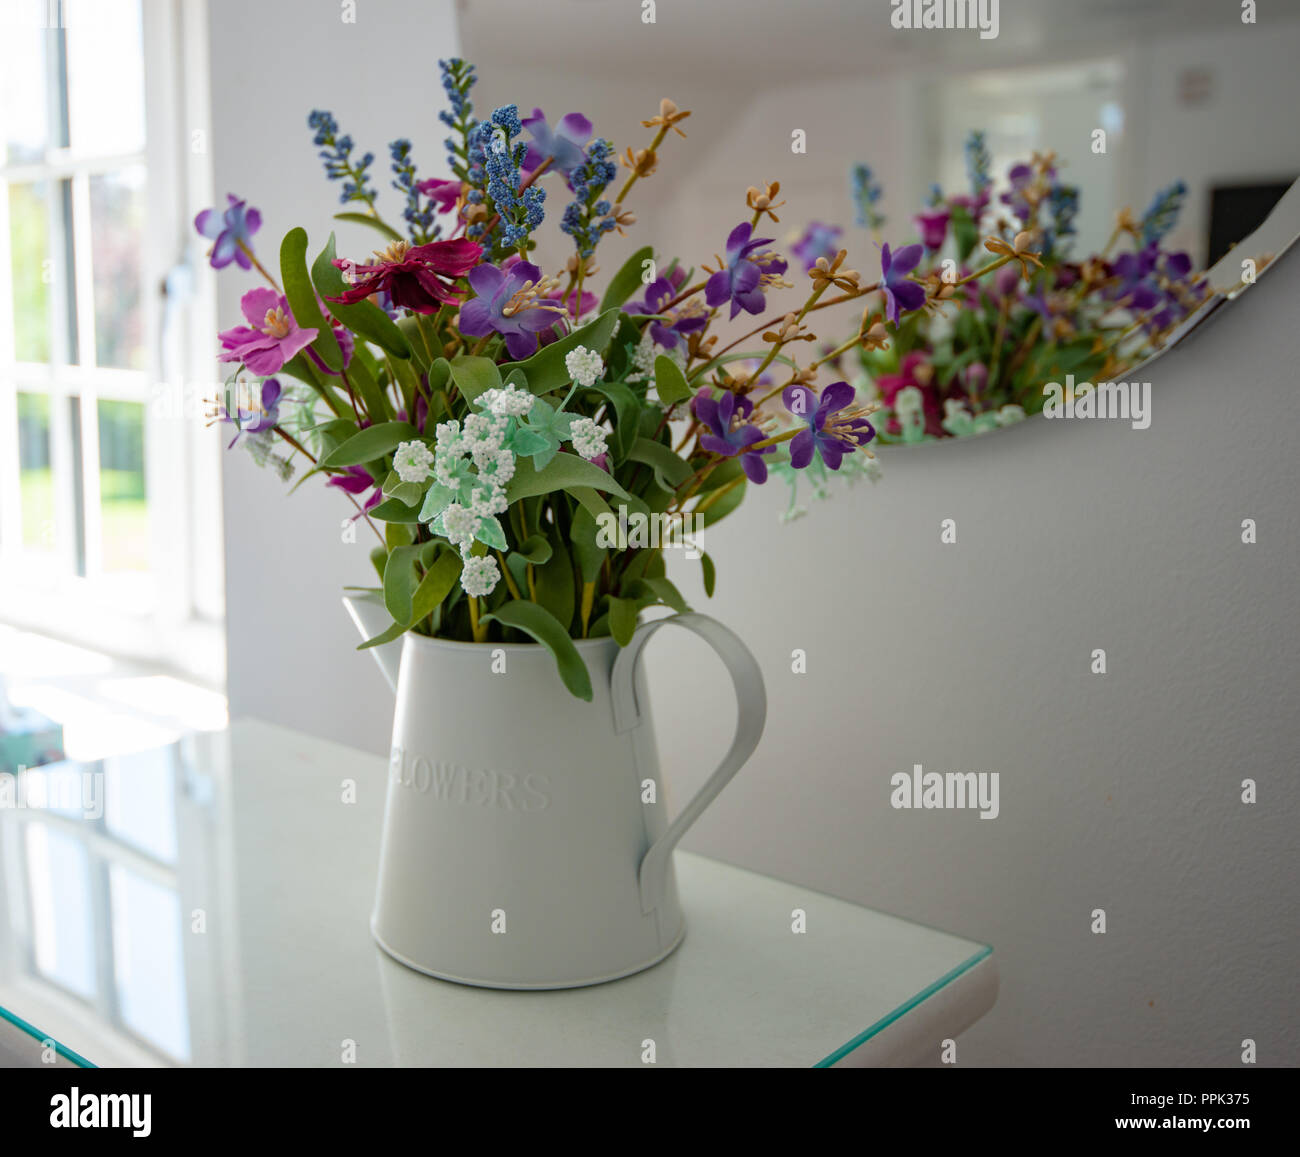 selection of natural/wild colourful looking flowers displayed in a white jug in natural light against a white background Stock Photo